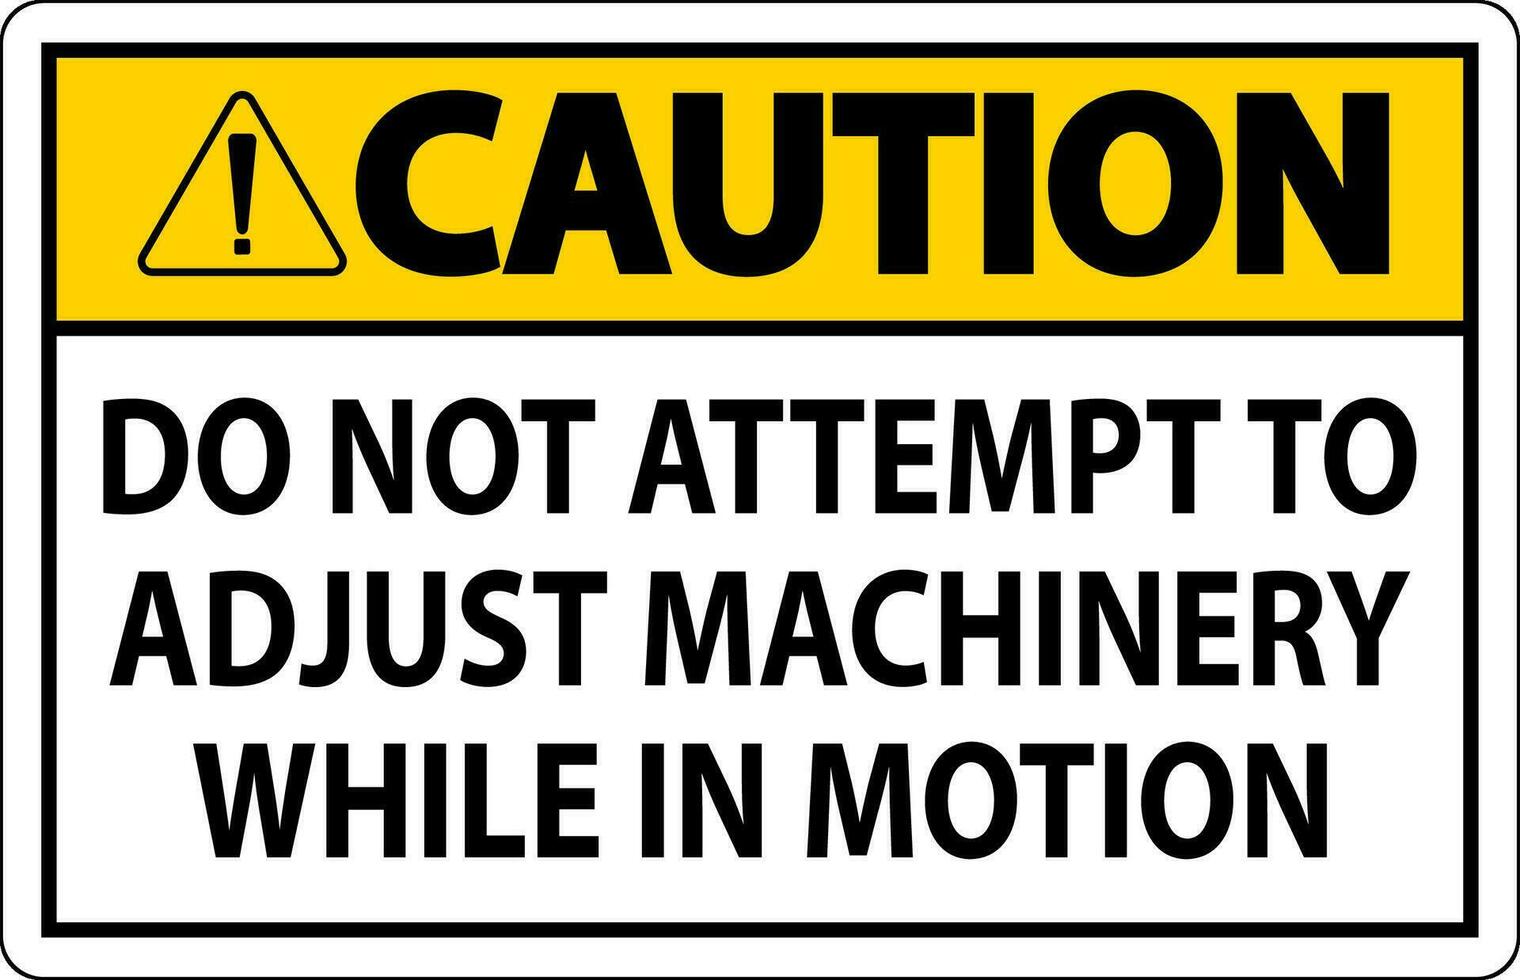 Caution Sign Do Not Attempt To Adjust Machinery While In Motion vector